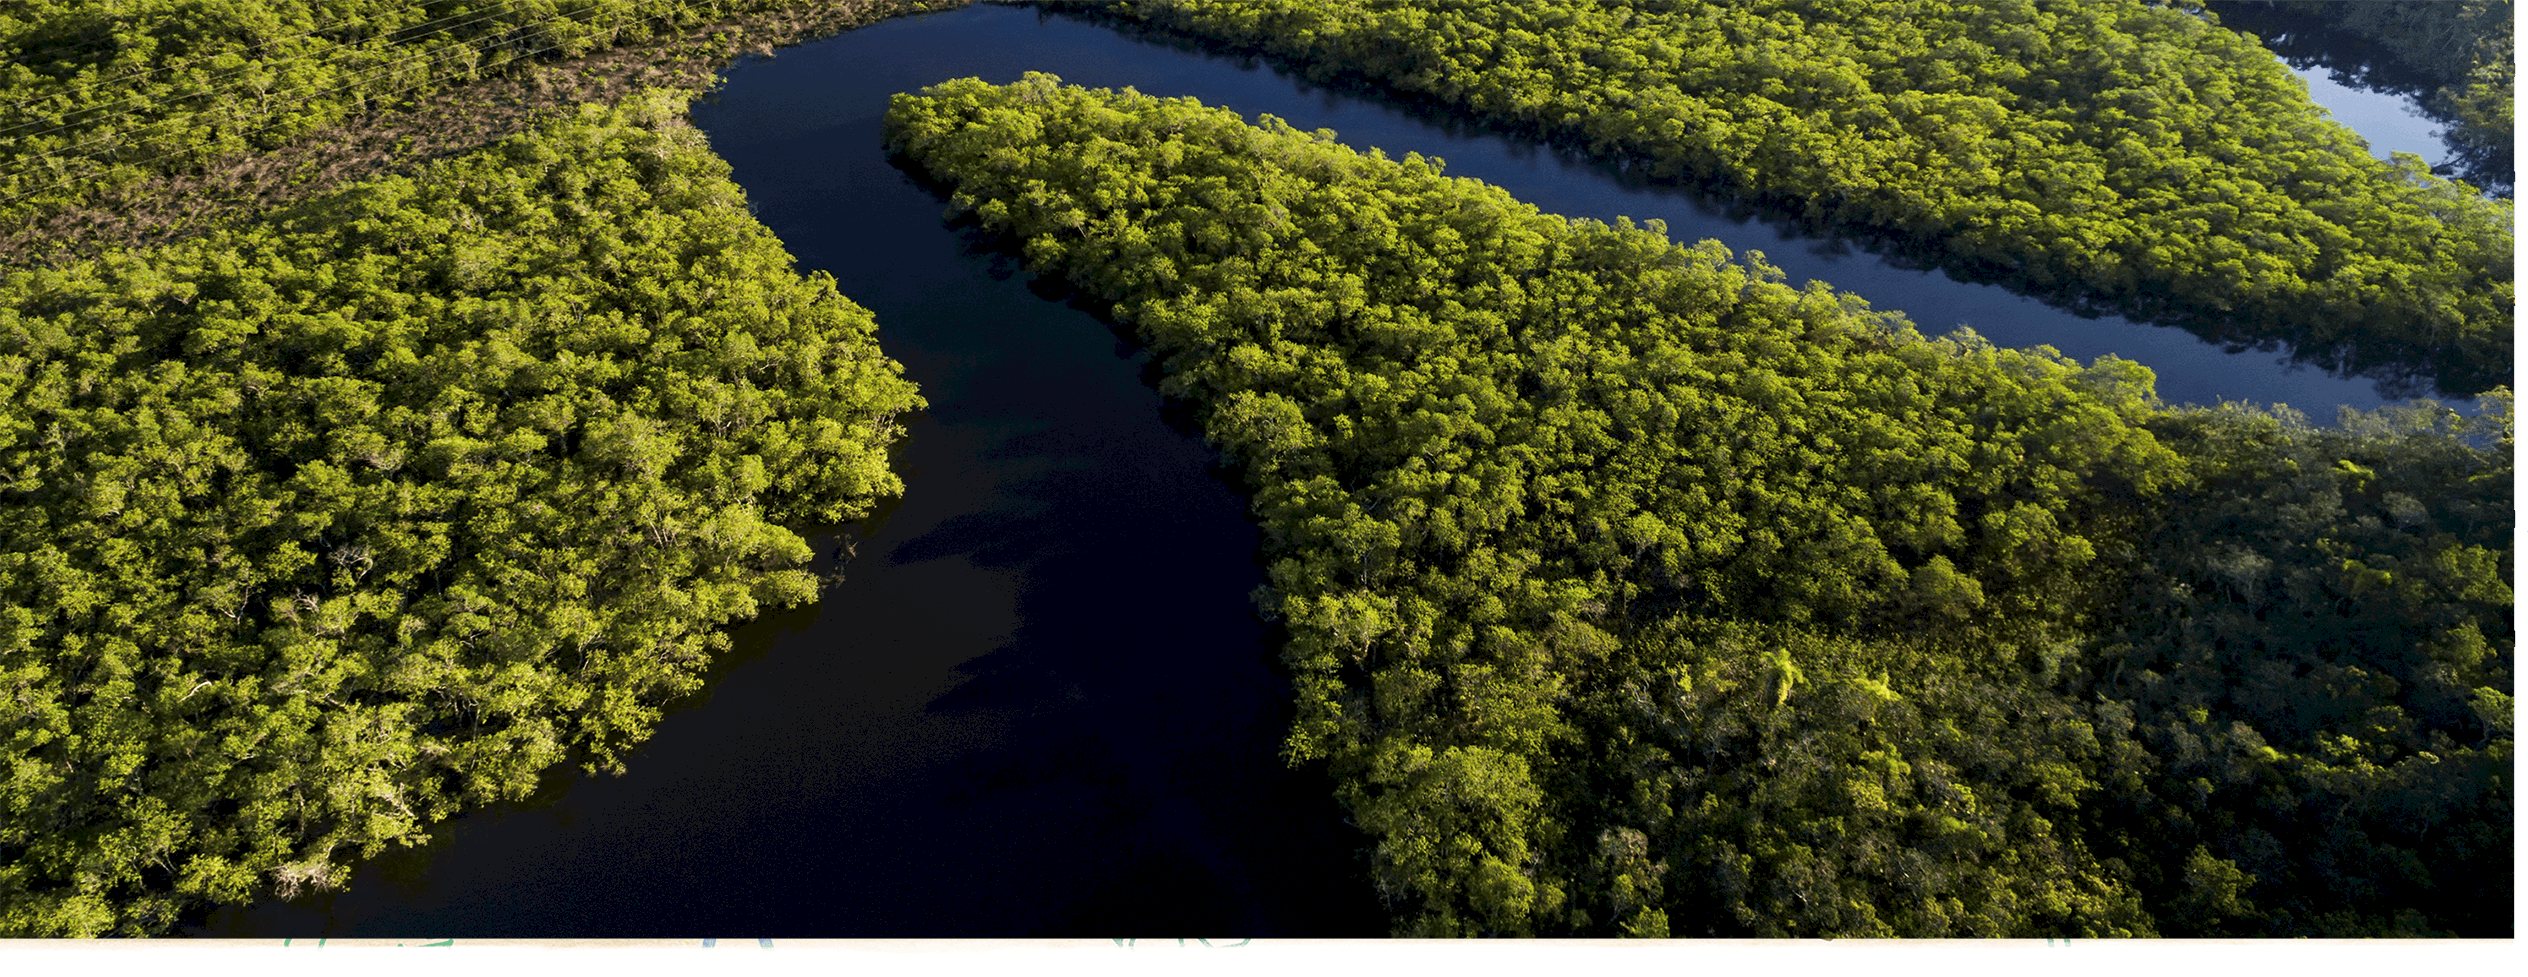 Why the Amazon Matters